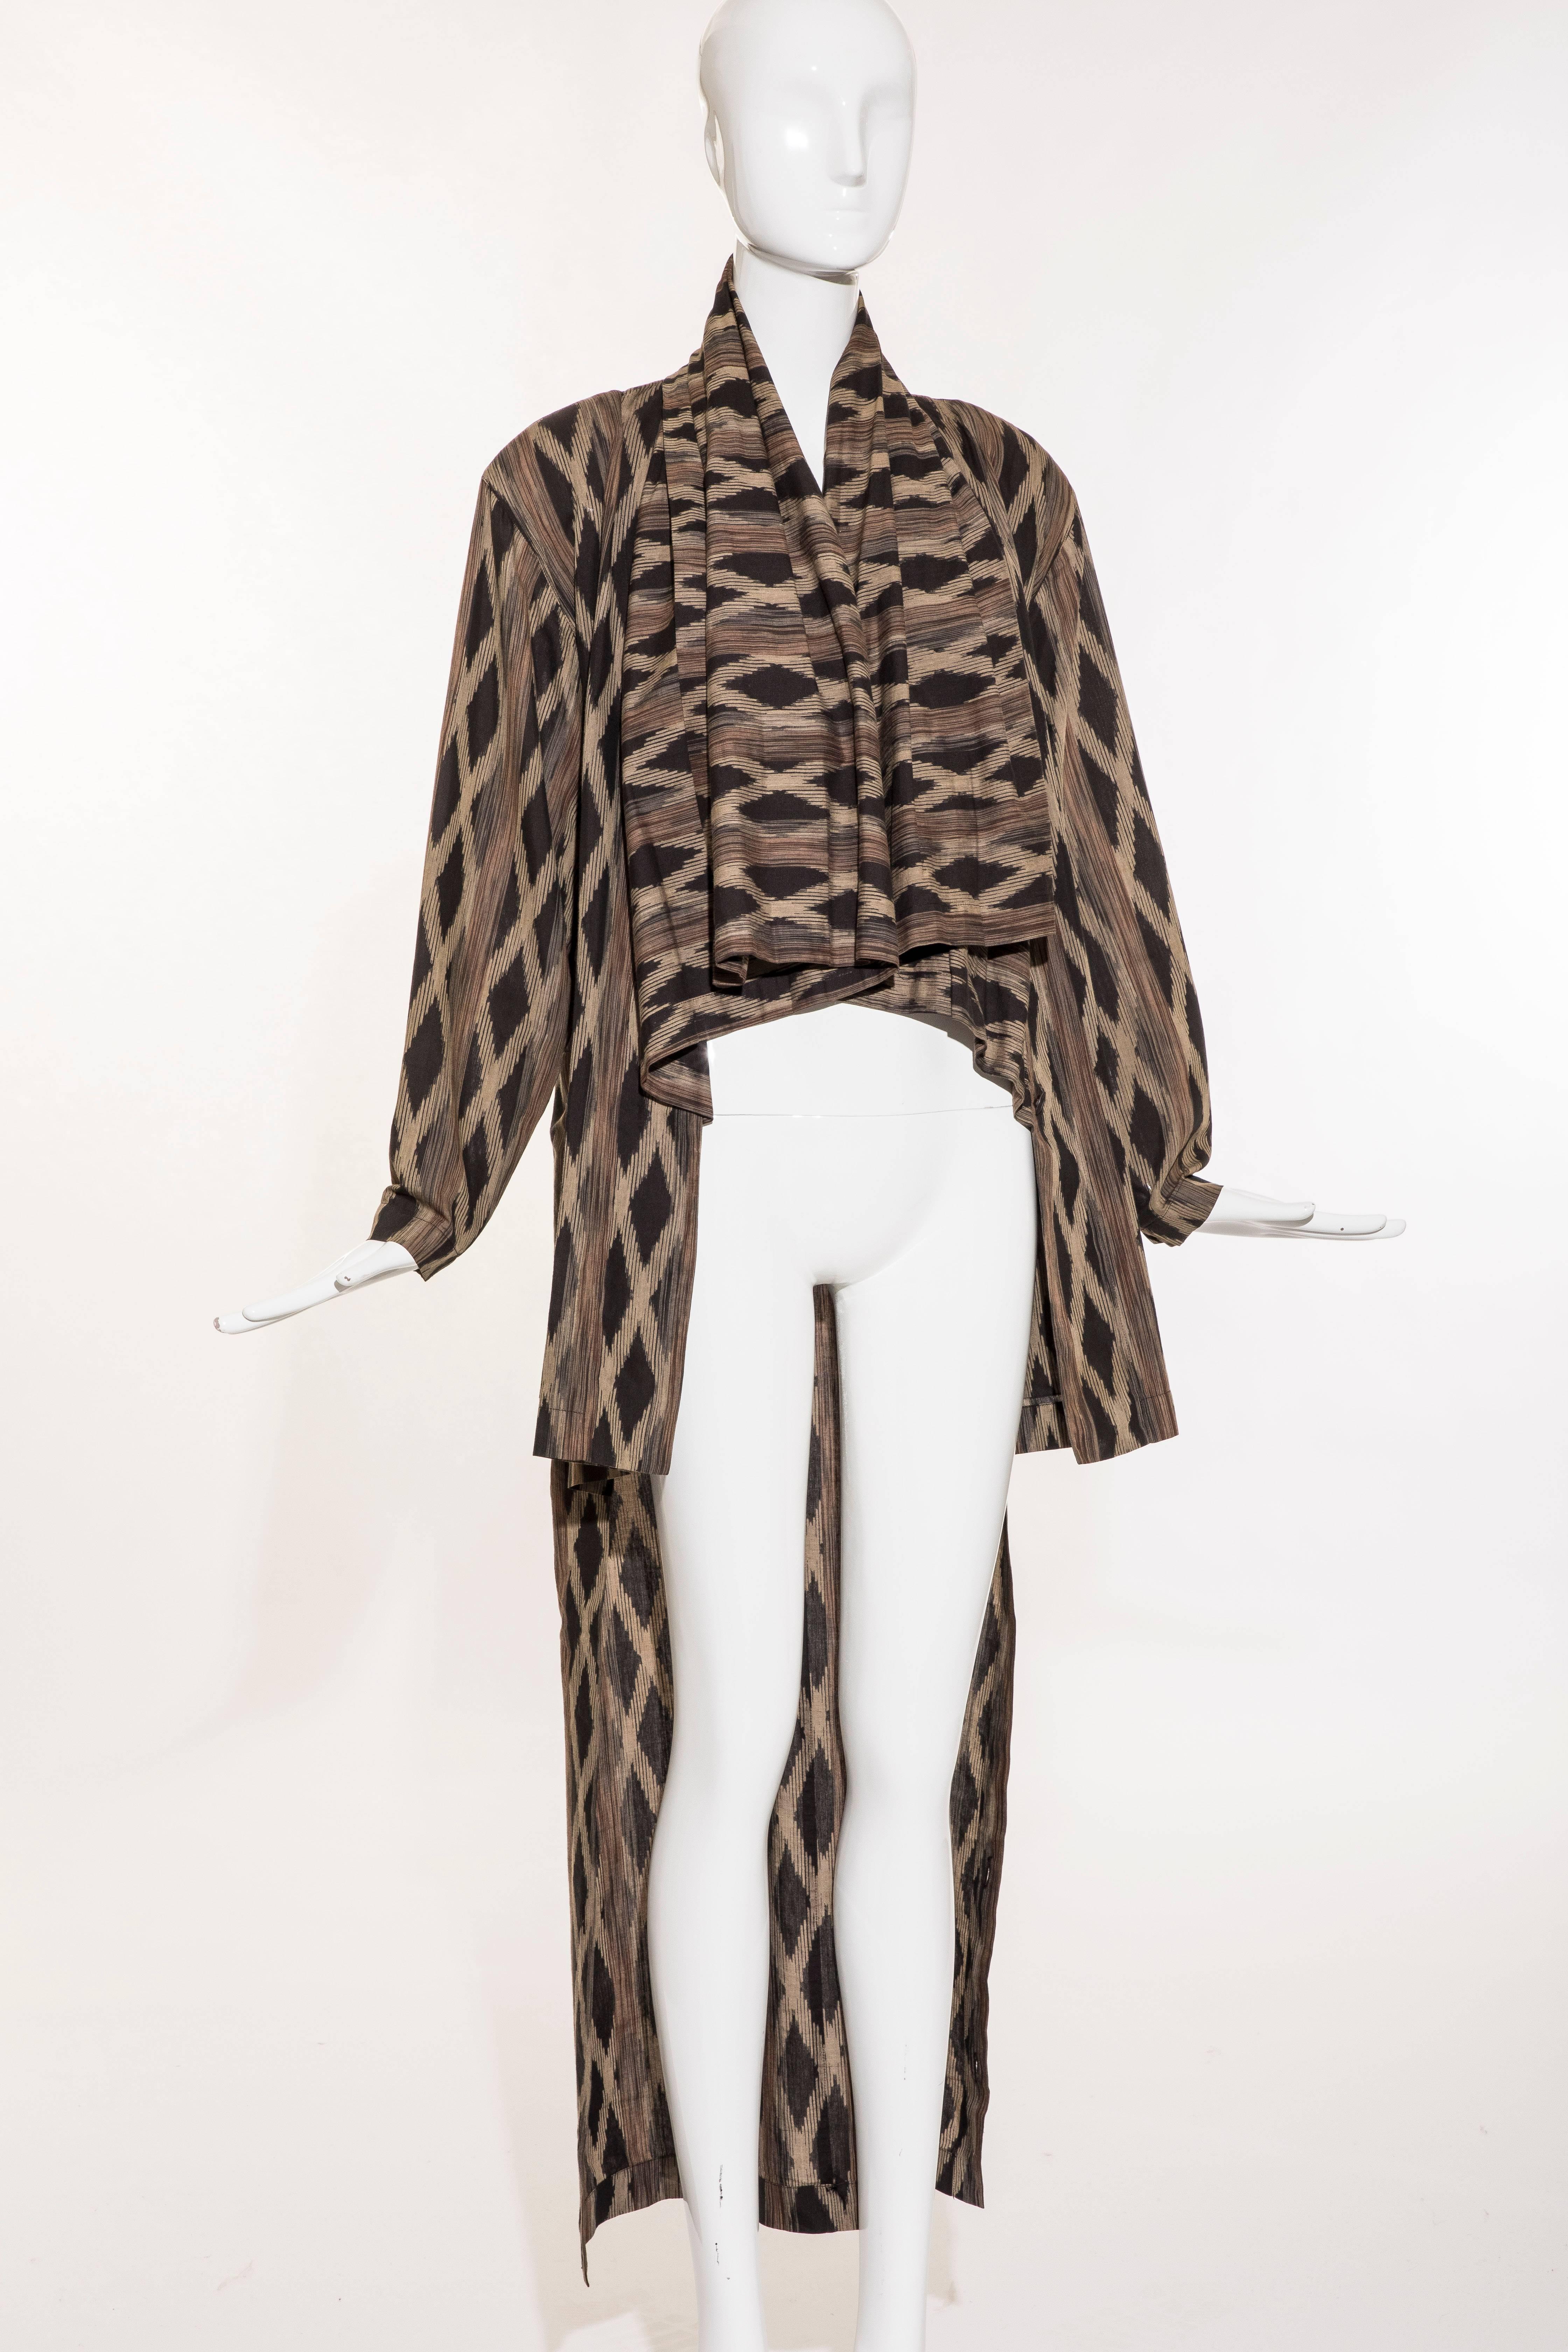 Issey Miyake Cotton Silk Lattice Weave Jacket Duster Cardigan, Fall 1986 For Sale 5